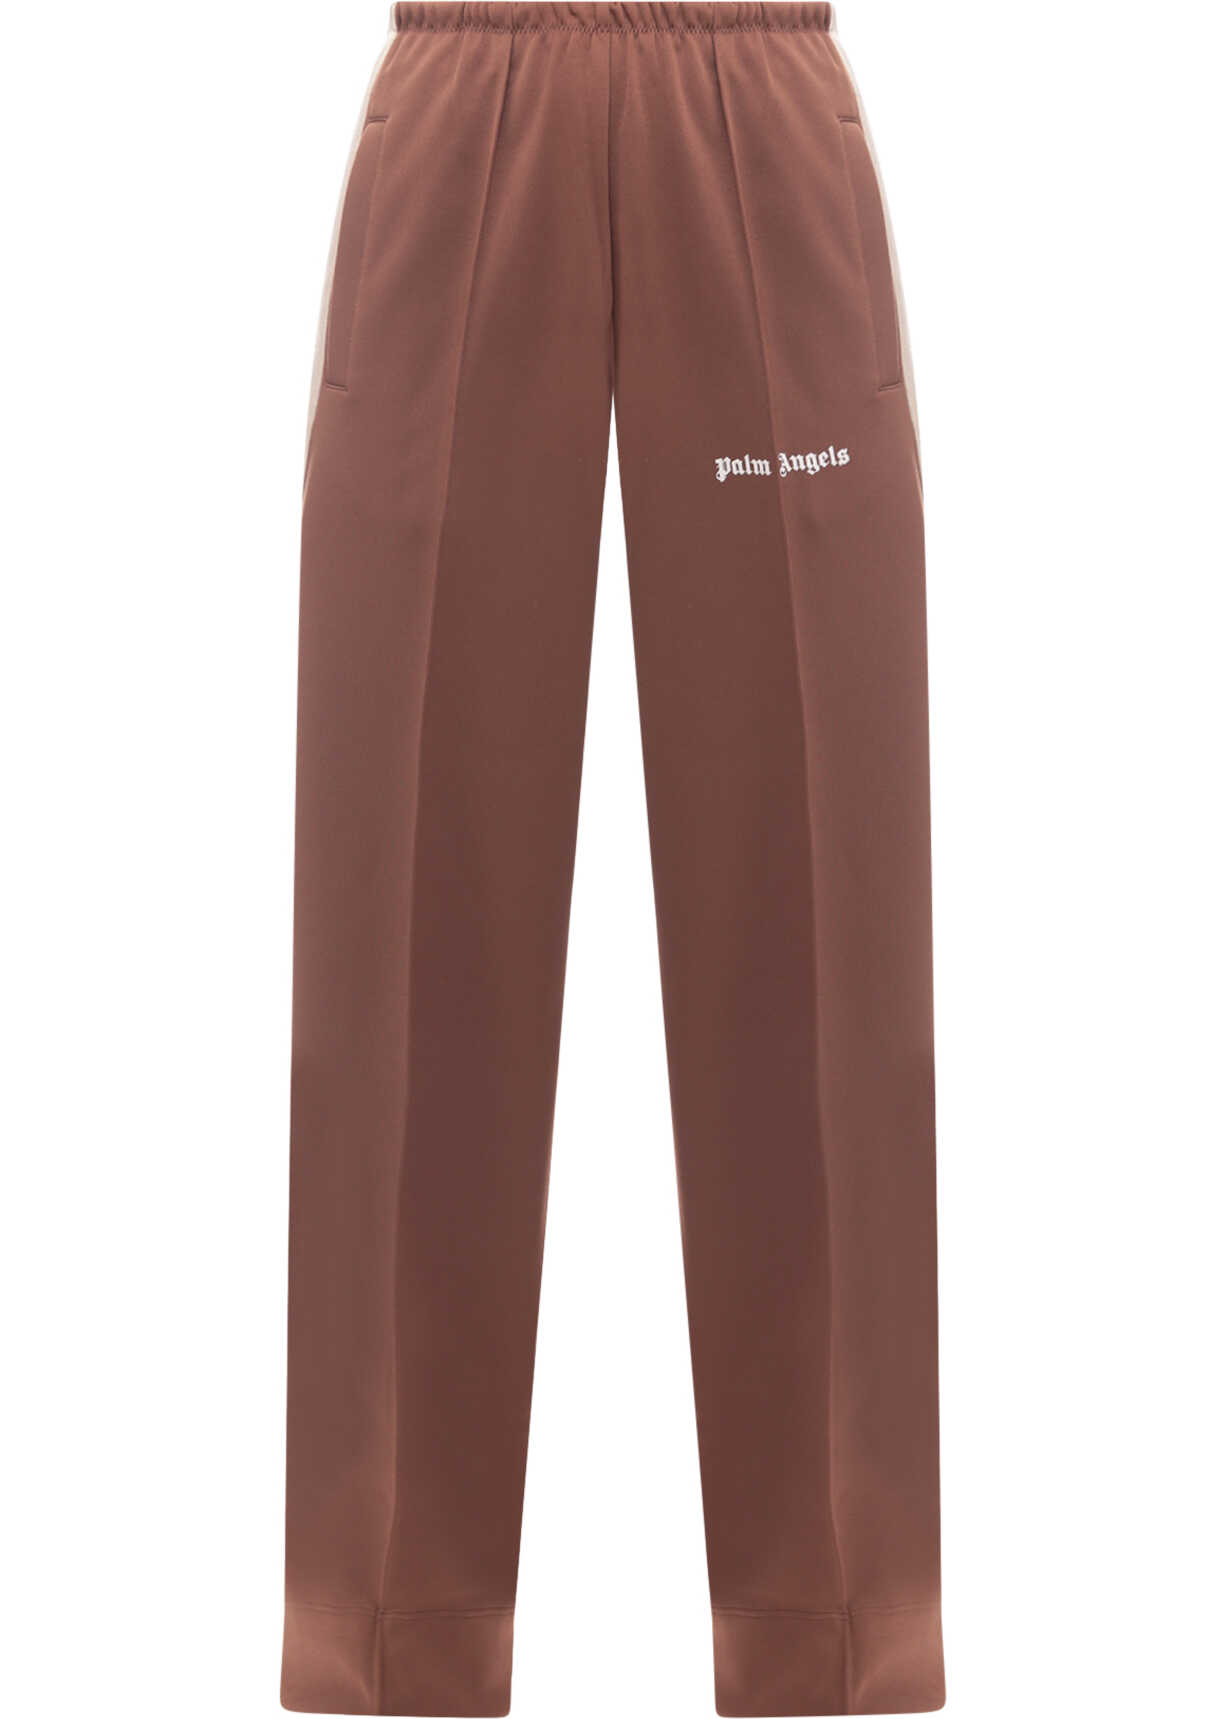 Palm Angels Trouser Brown image0